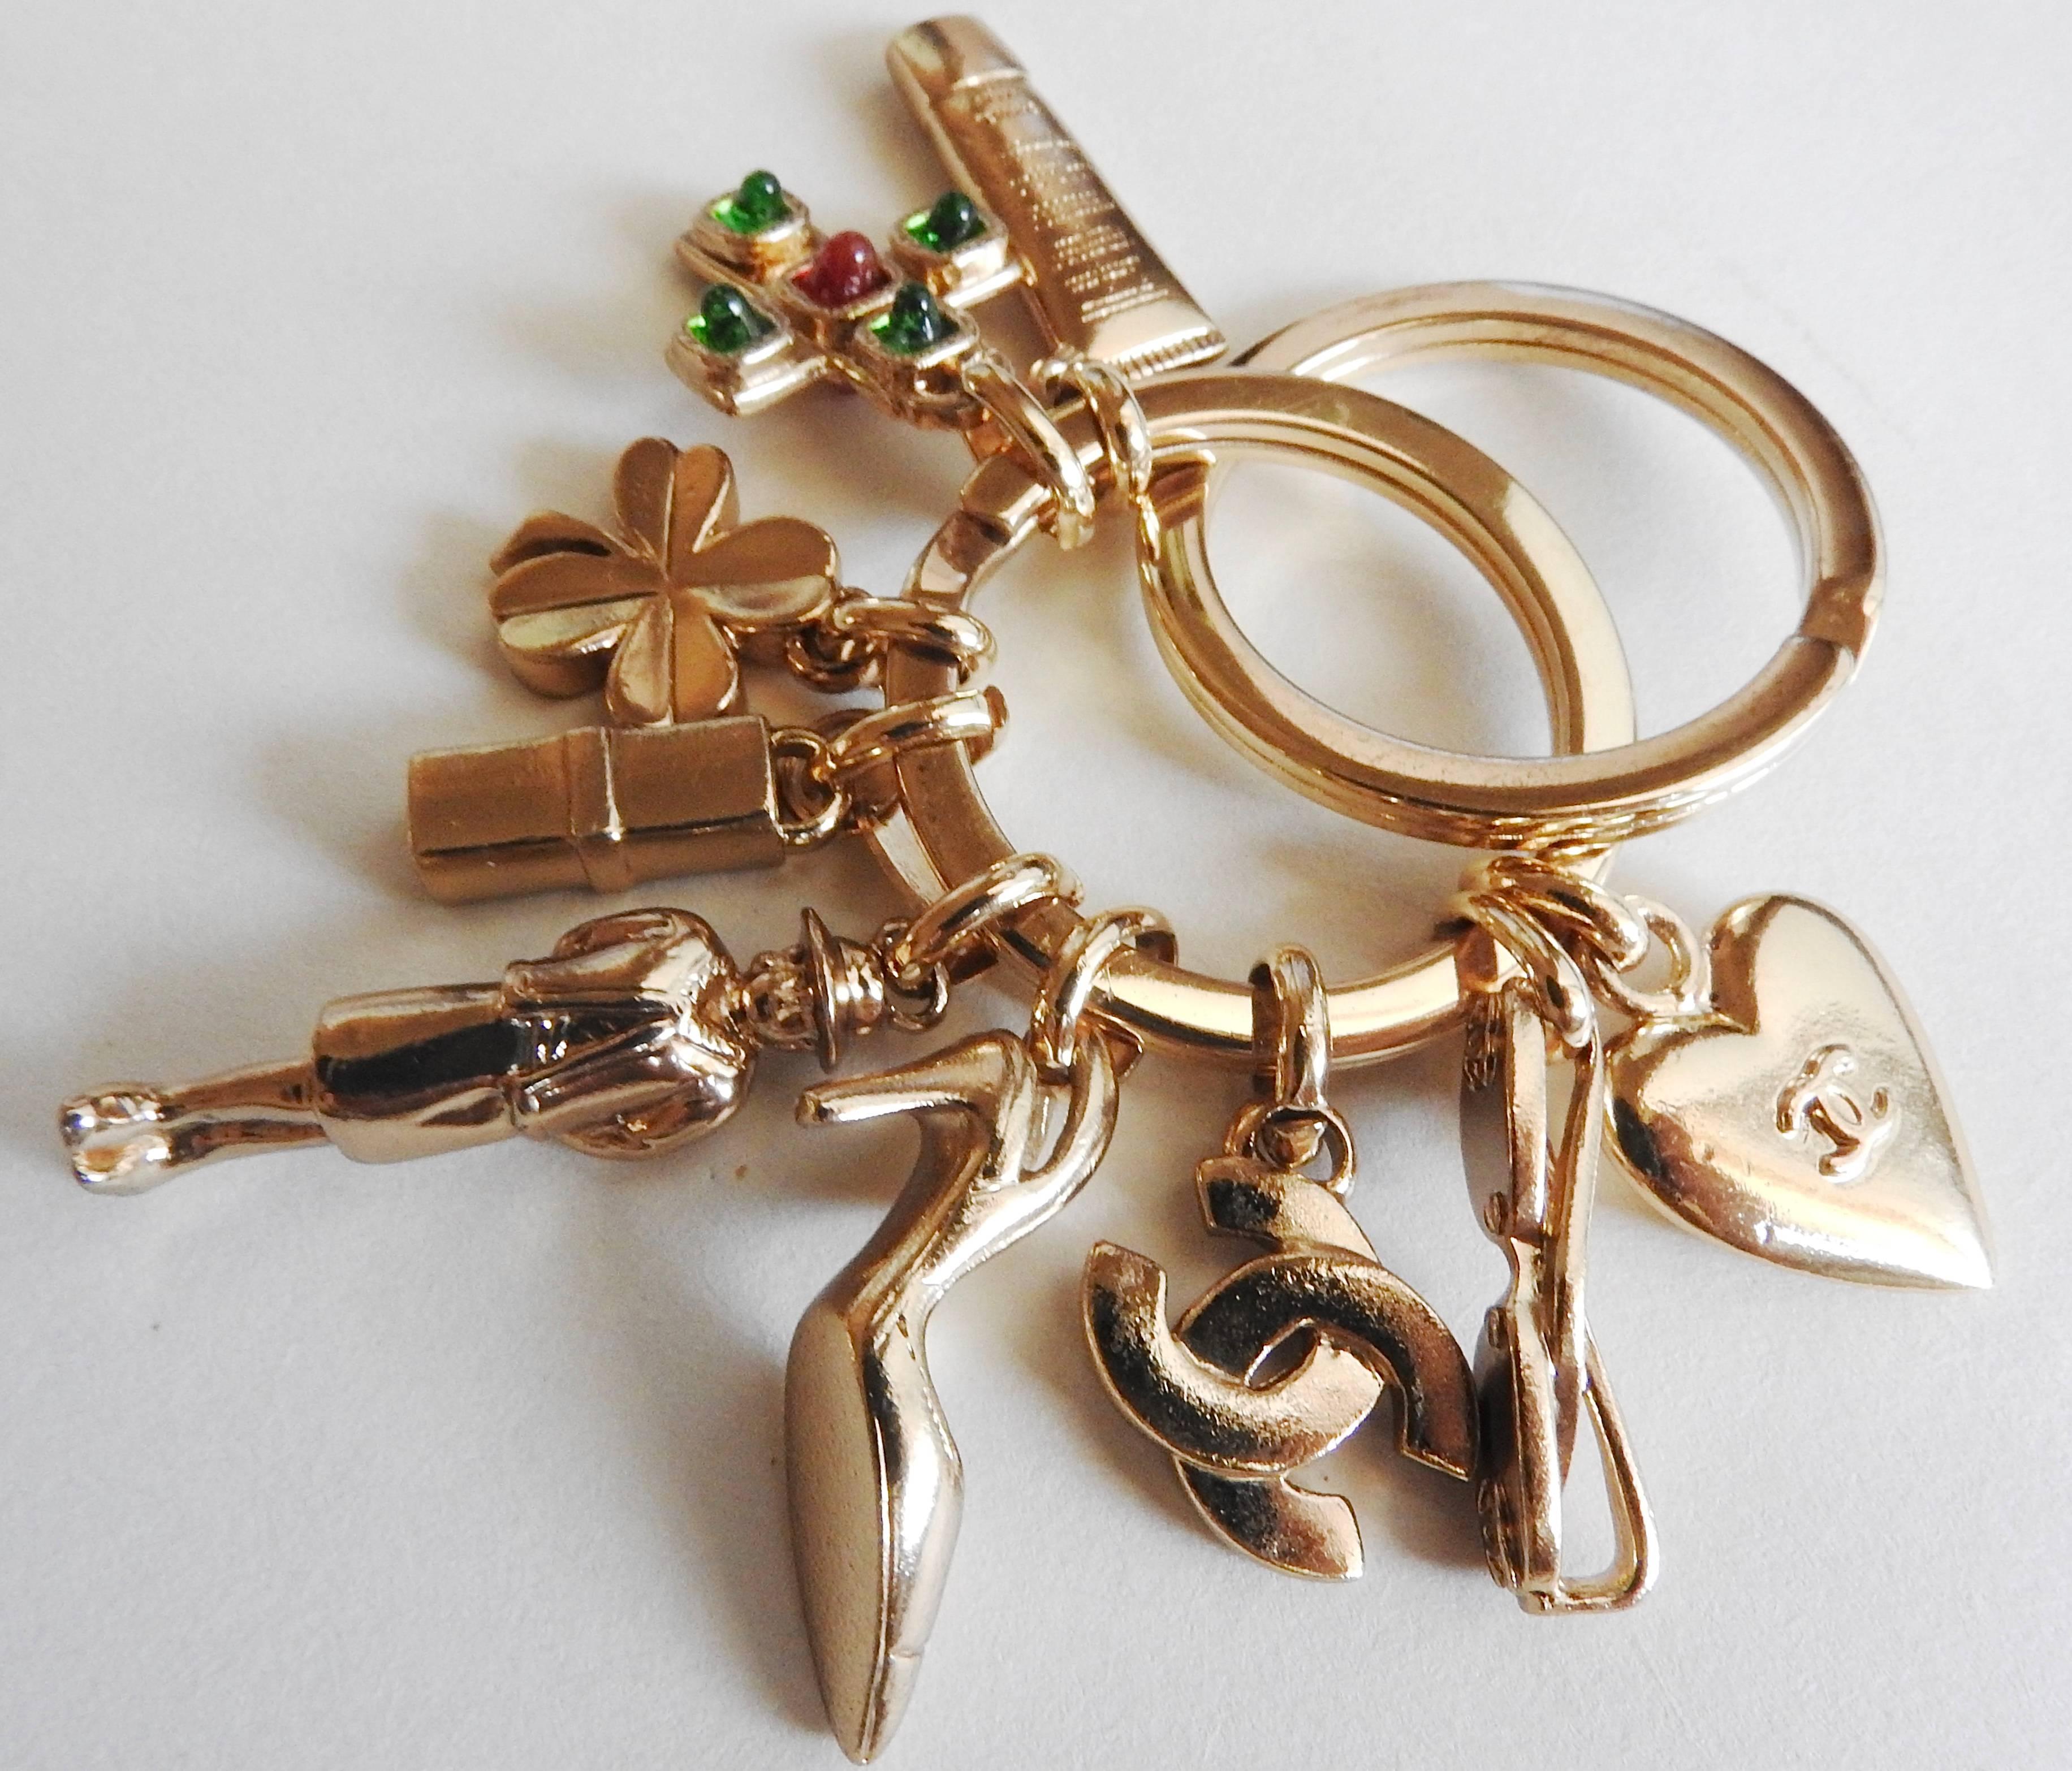 This collectors' 2002P double rings keyring is so complete with all iconic charms, such as sunglasses, heart, Gripoix glass cross, facial cream, shamrock, lipstick, Coco herself, sanders an CC logo. This key ring can be also used as a necklace